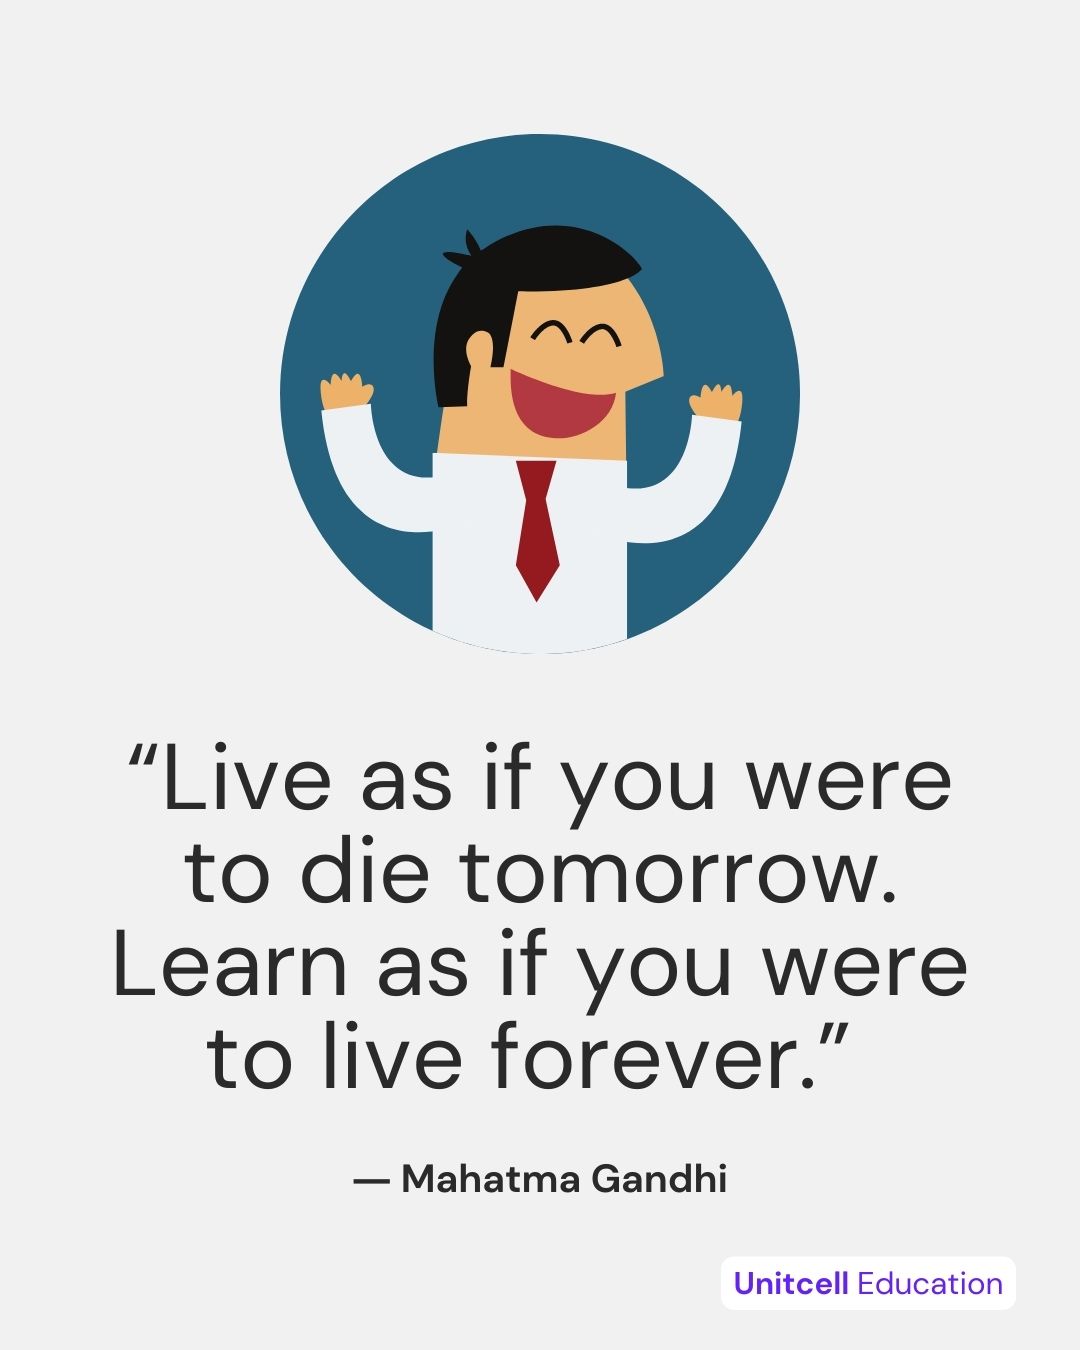 “Live as if you were to die tomorrow. Learn as if you were to live forever.”